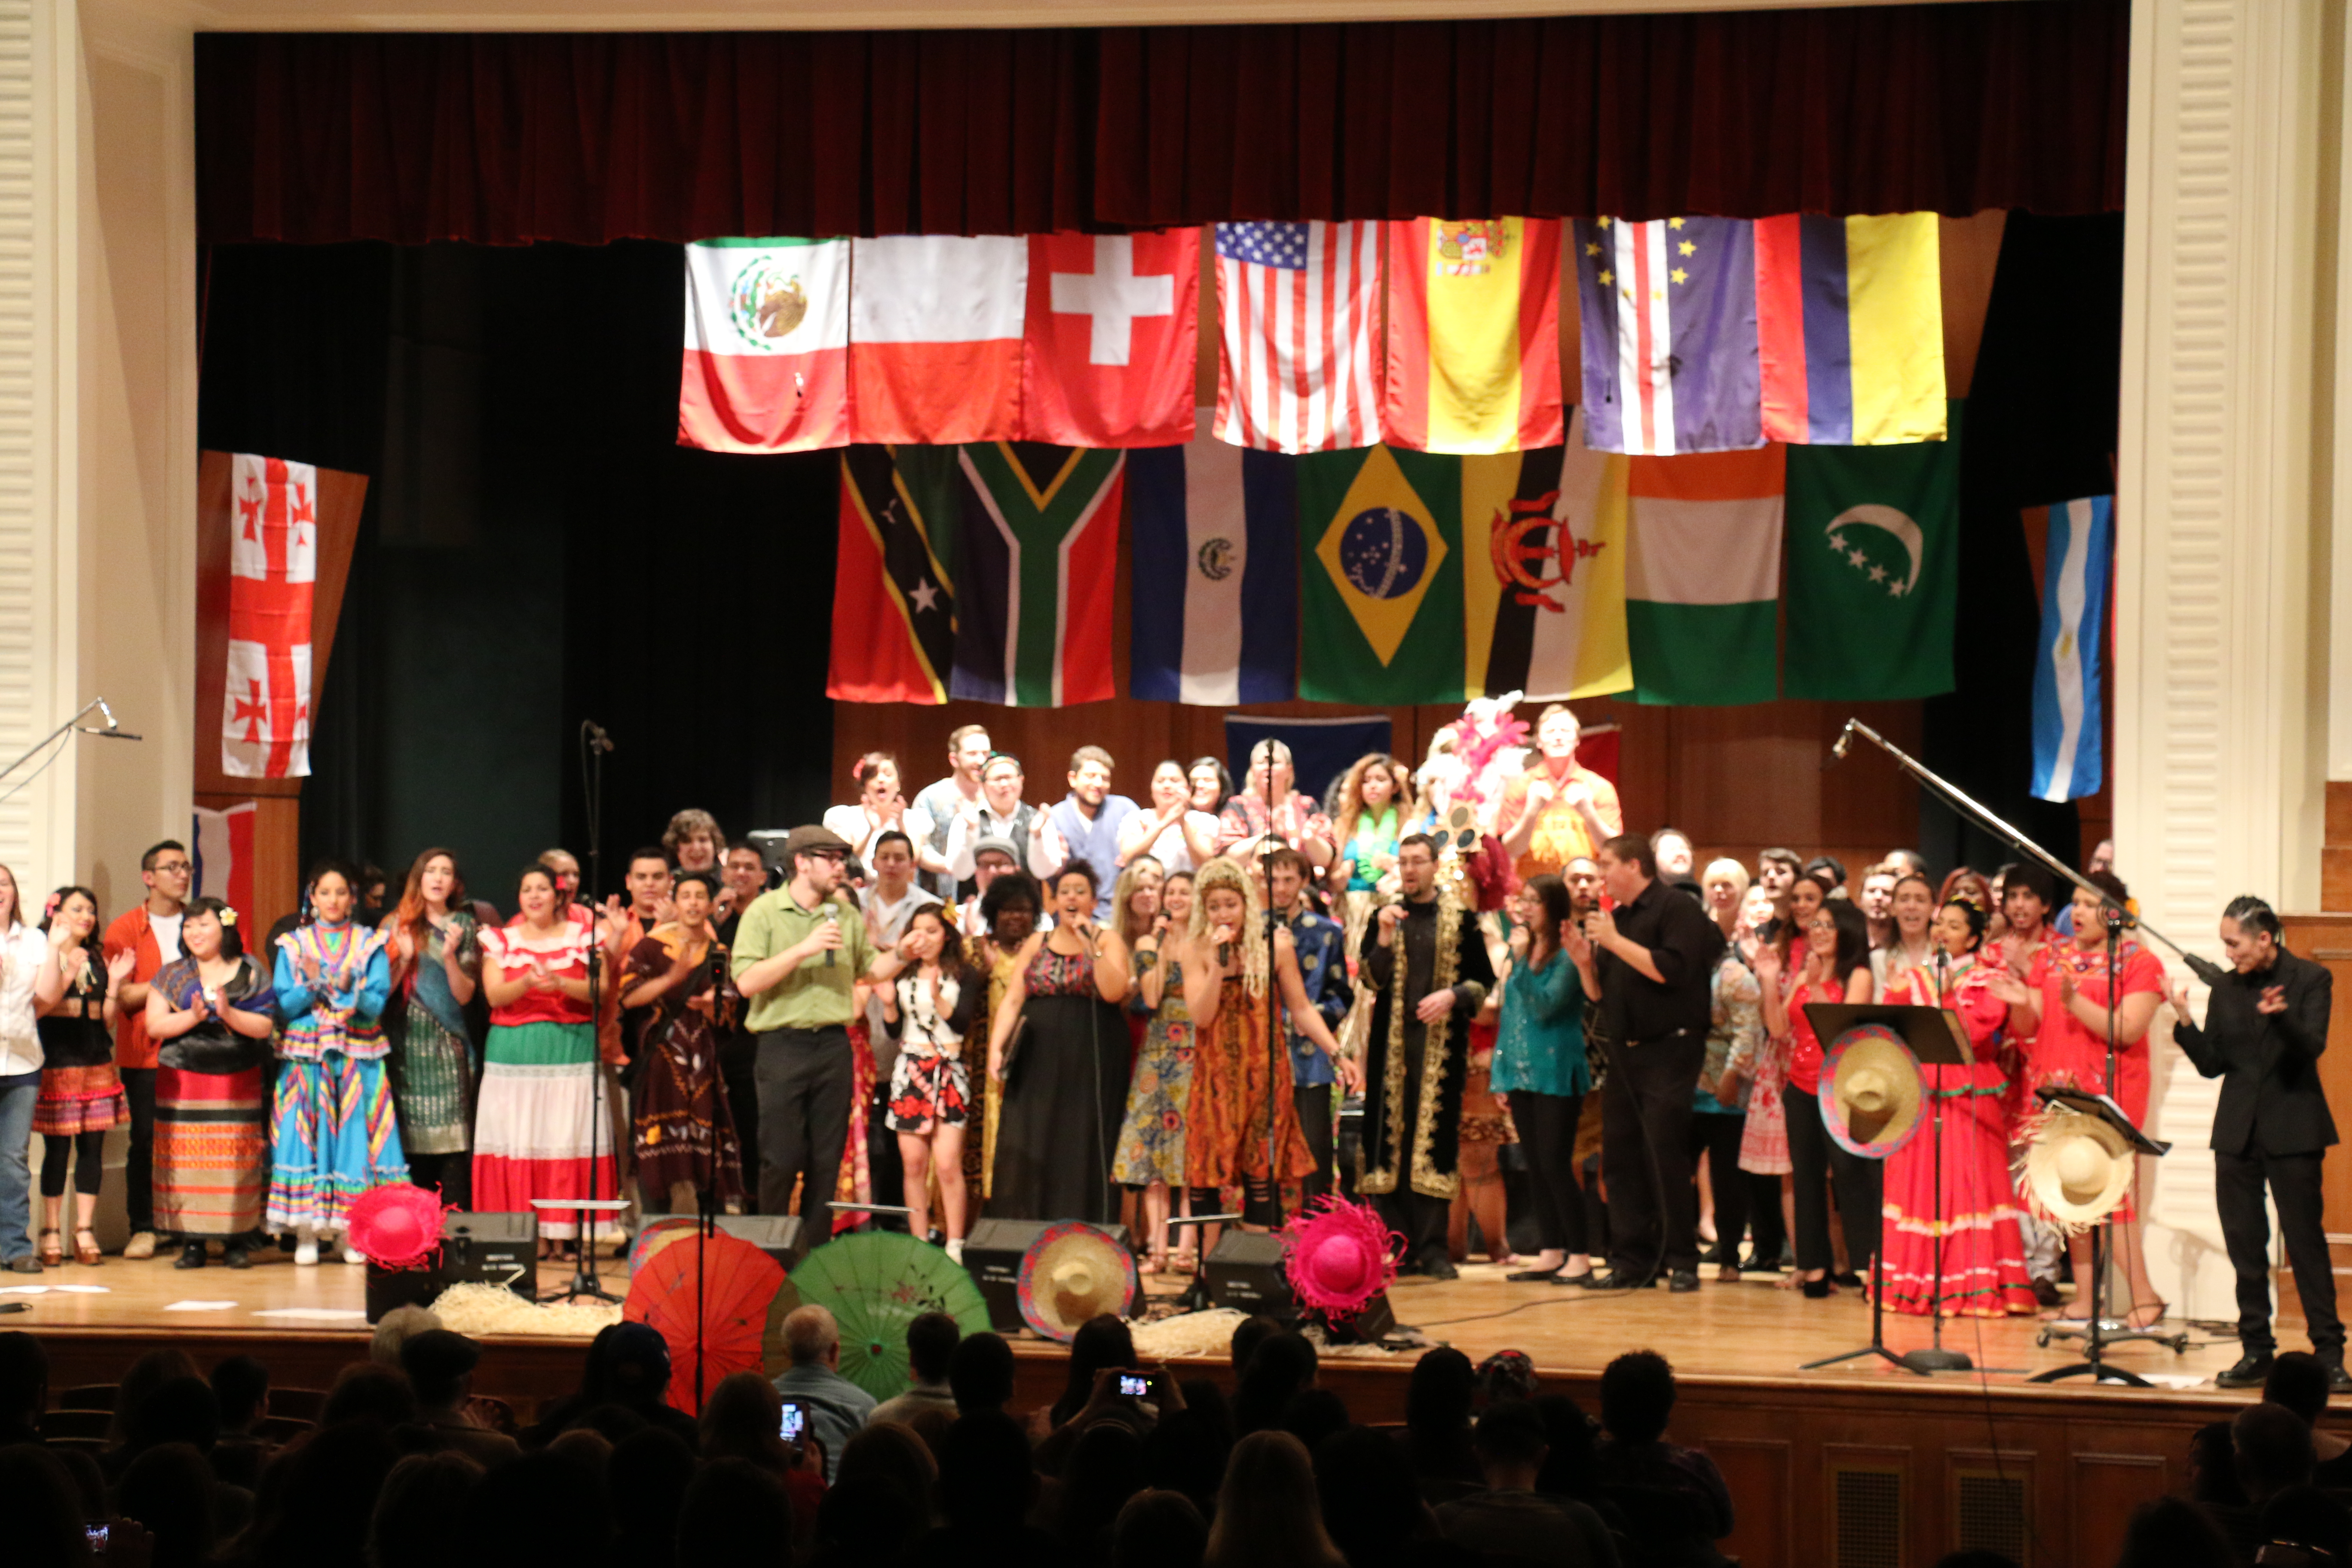      FCC Choirs World Music Concerts 